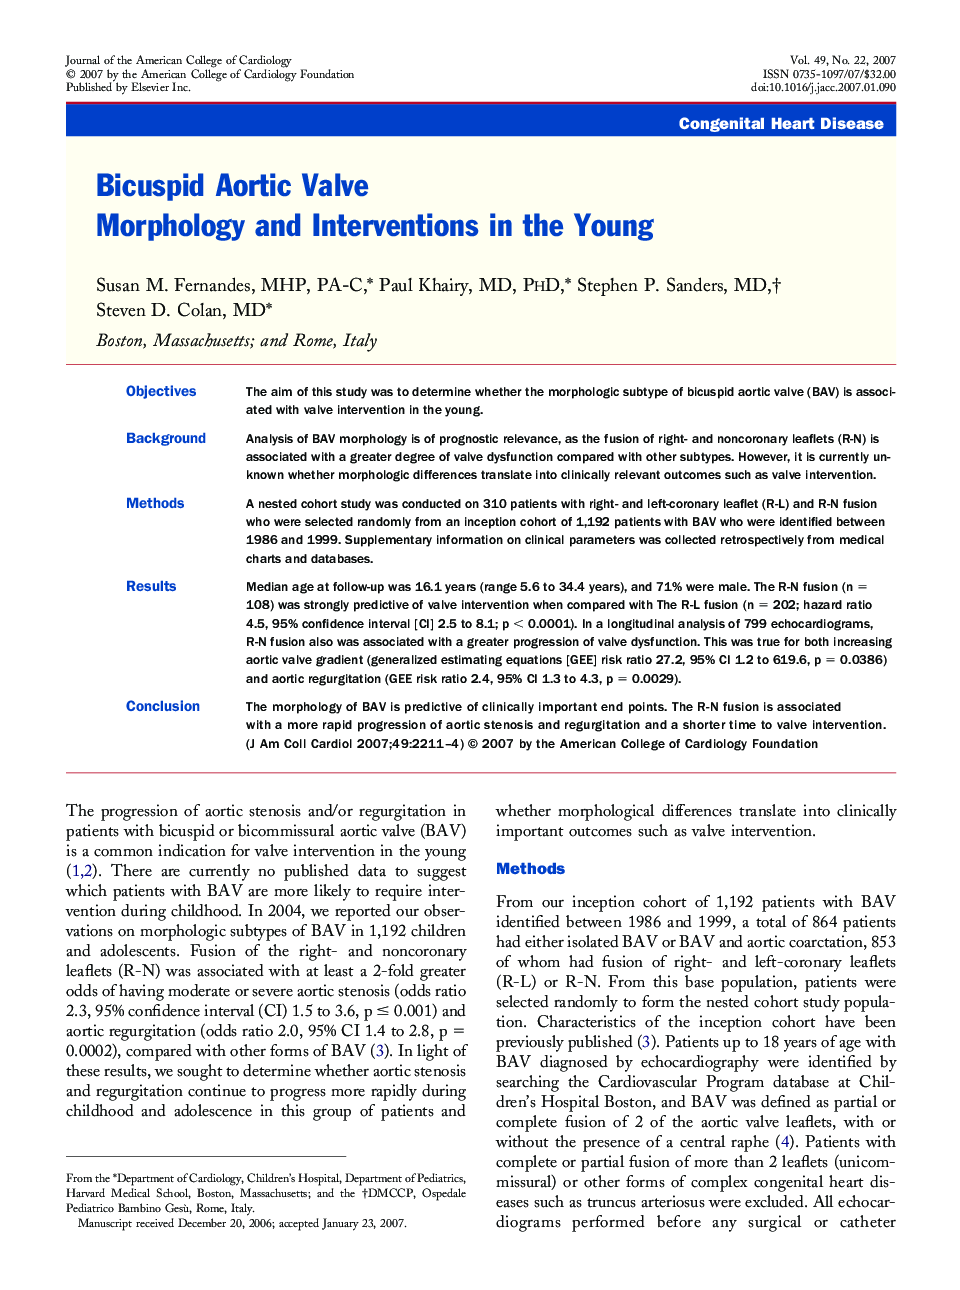 Bicuspid Aortic Valve Morphology and Interventions in the Young